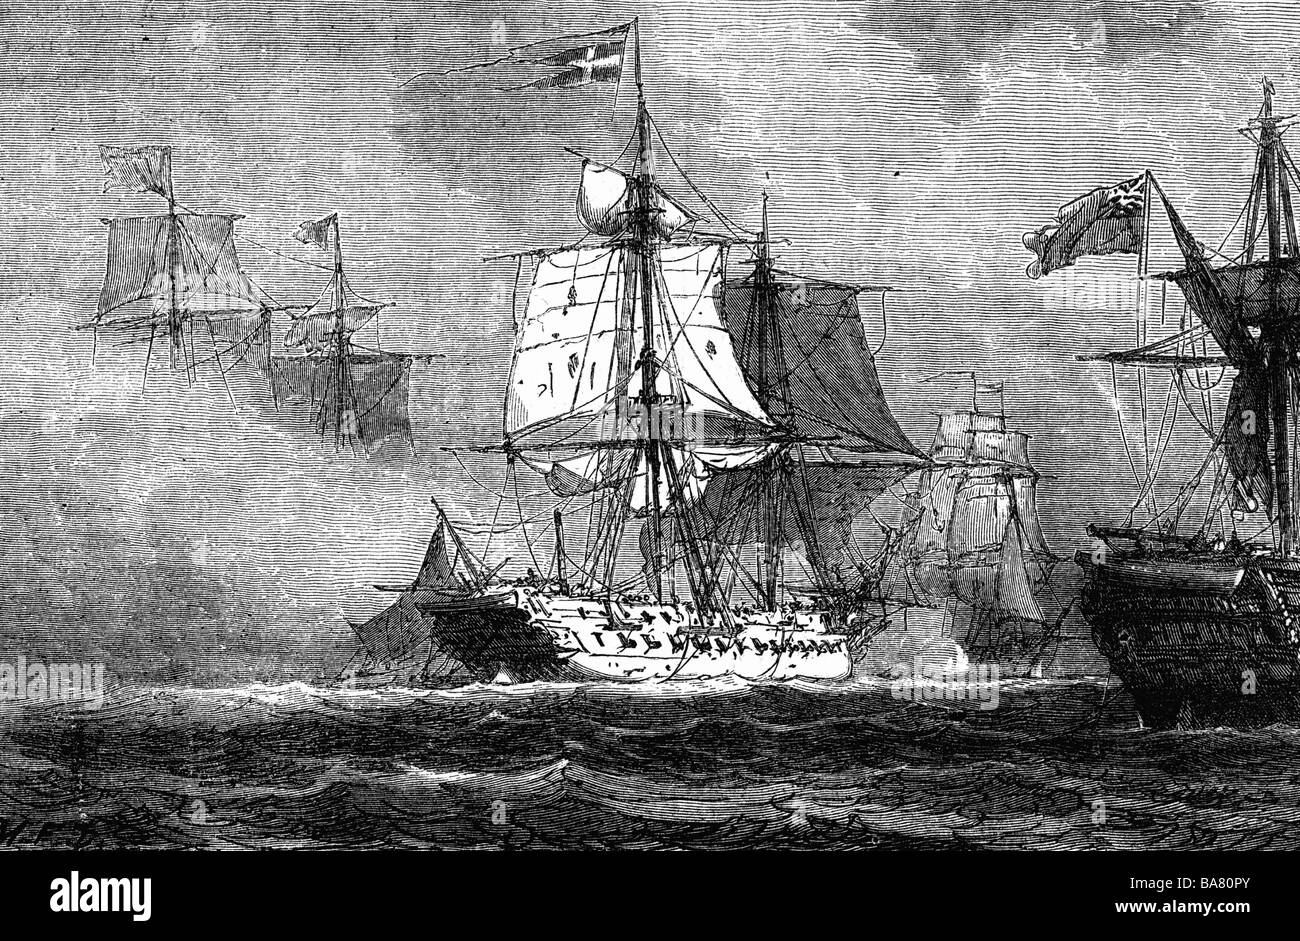 events, War of the Forth Coalition 1806 - 1807, 2nd Naval Battle of Copenhagen, 16.8.1807 - 5.9.1807, Danish frigate "Freya" in combat, wood engraving, 19th century, , Stock Photo